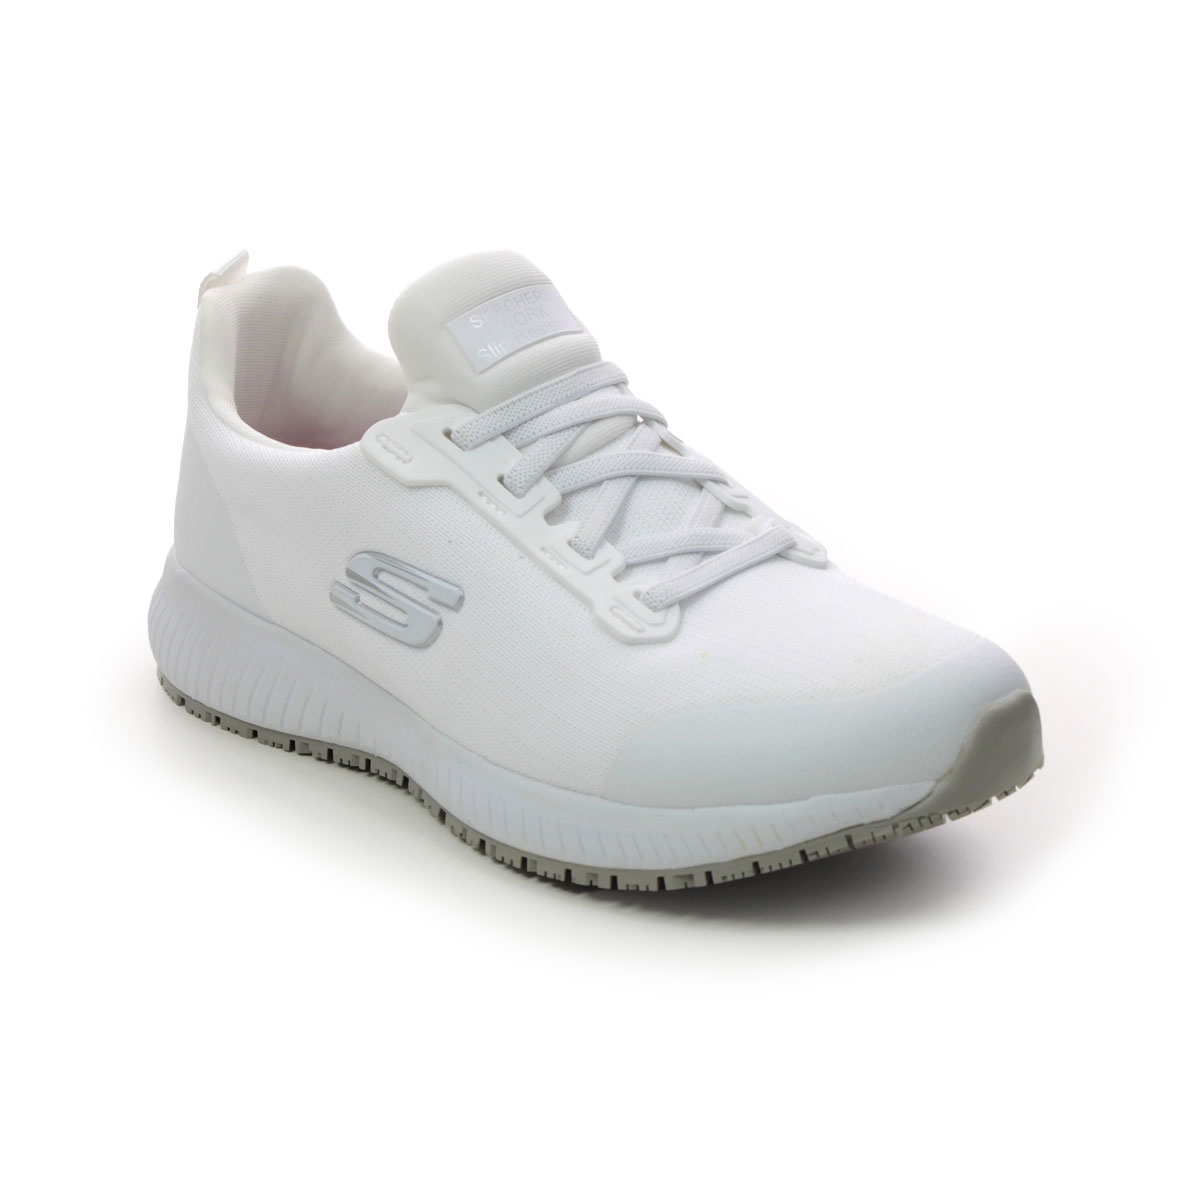 Skechers Work Squad Slip Resistant WHT White Womens trainers 77222EC in a Plain Textile in Size 7